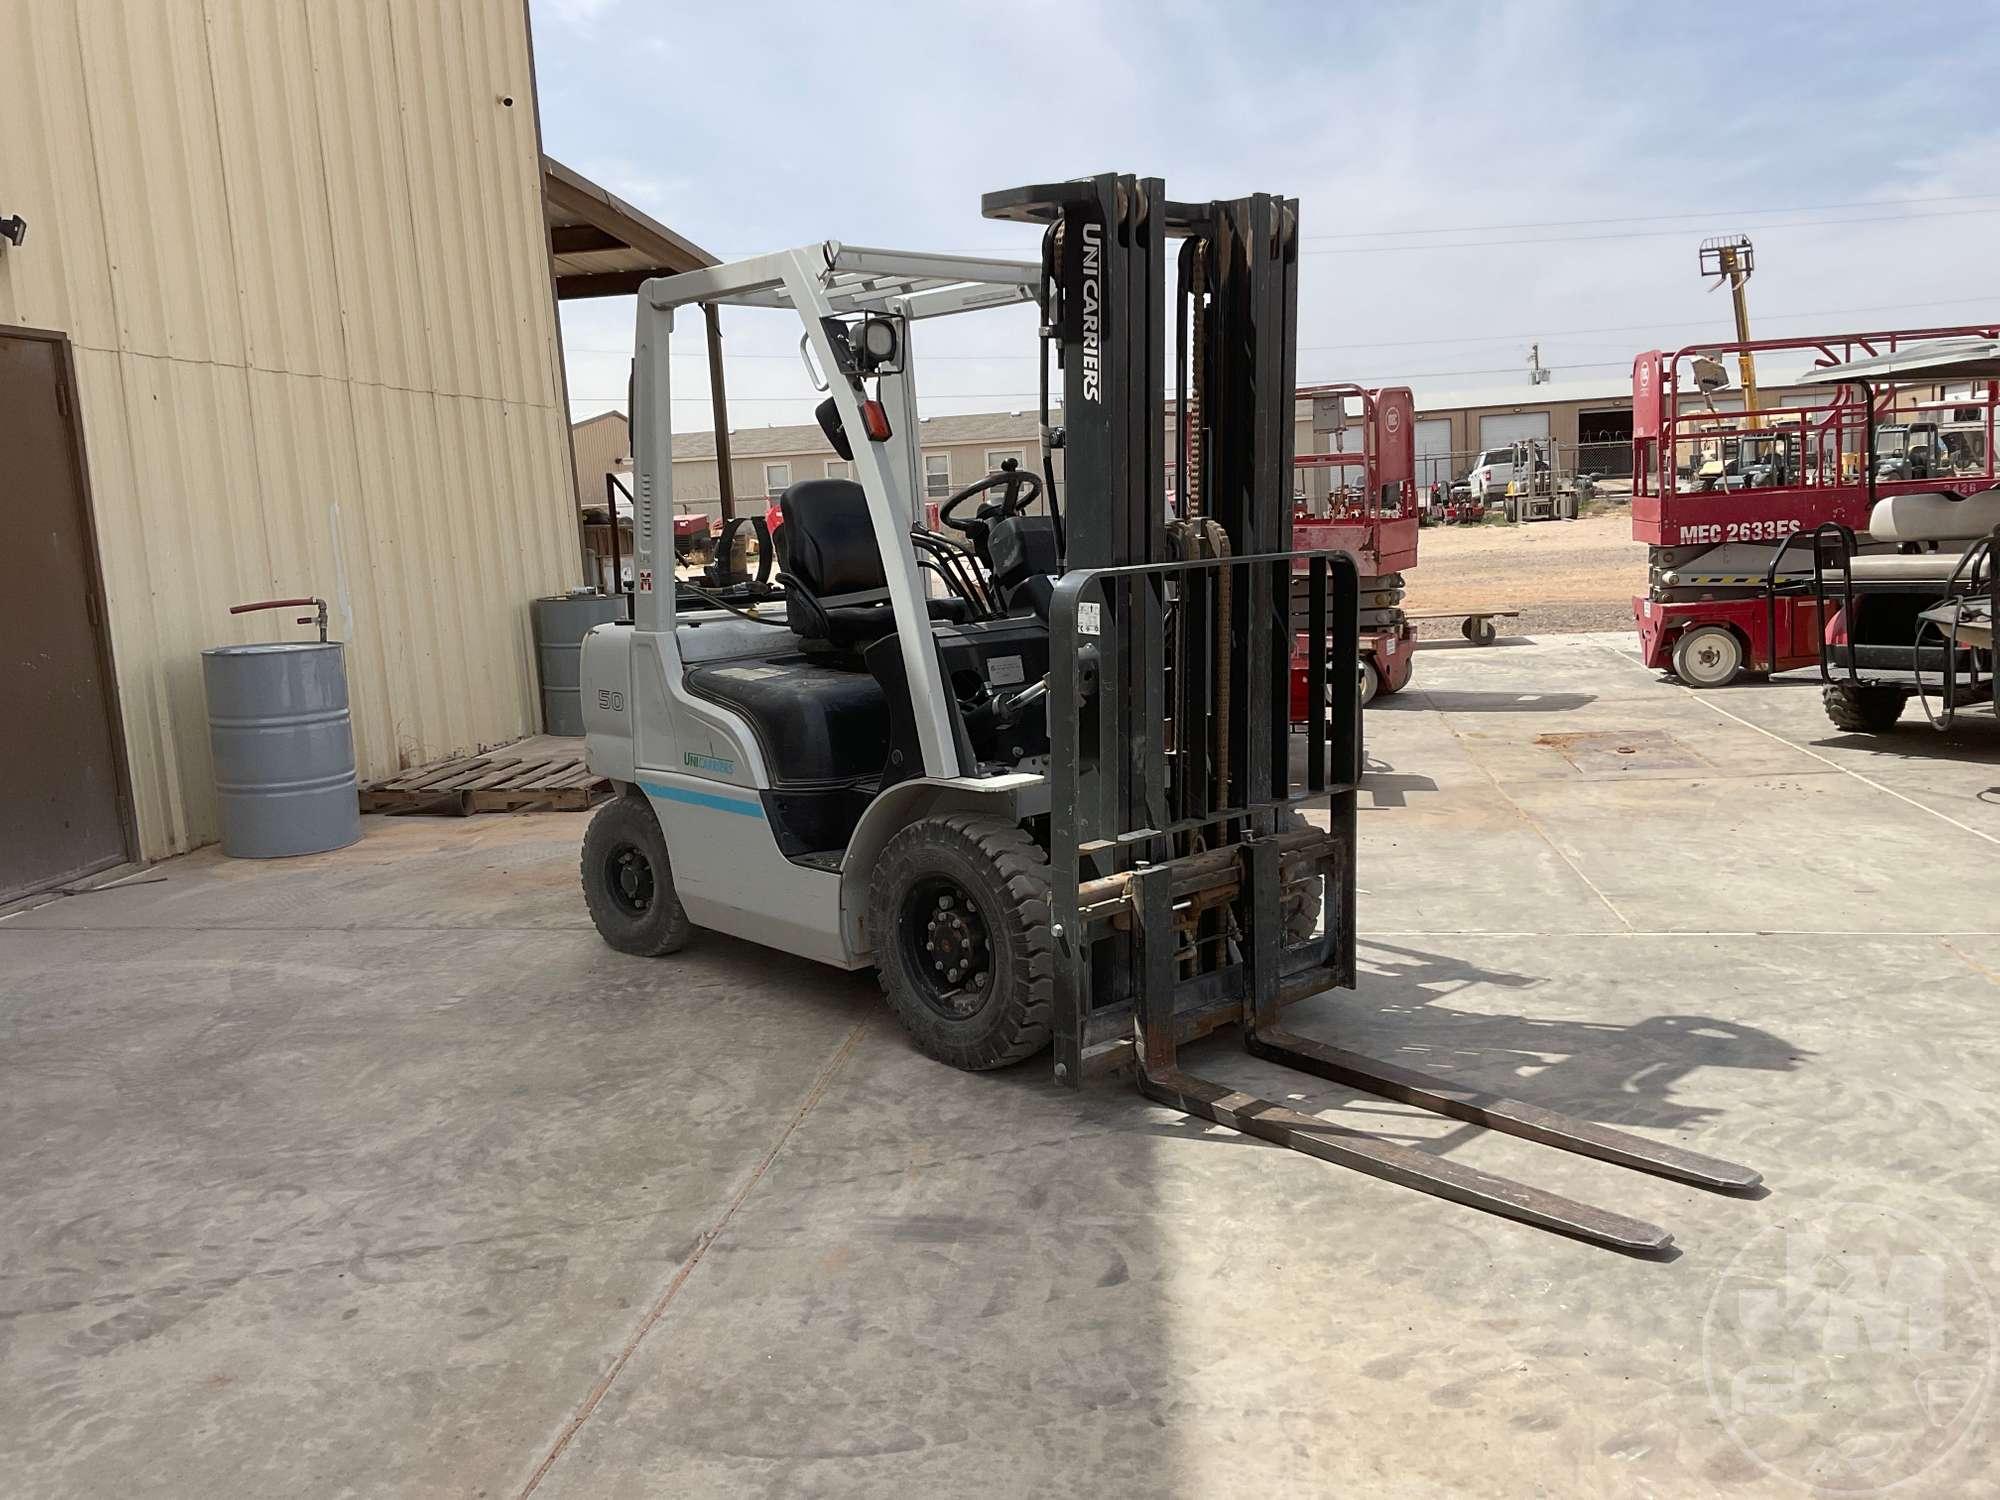 2020 UNICARRIERS AMERICAS MP1F2A25DV PNEUMATIC TIRE FORKLIFT SN: P1F2-9H25826